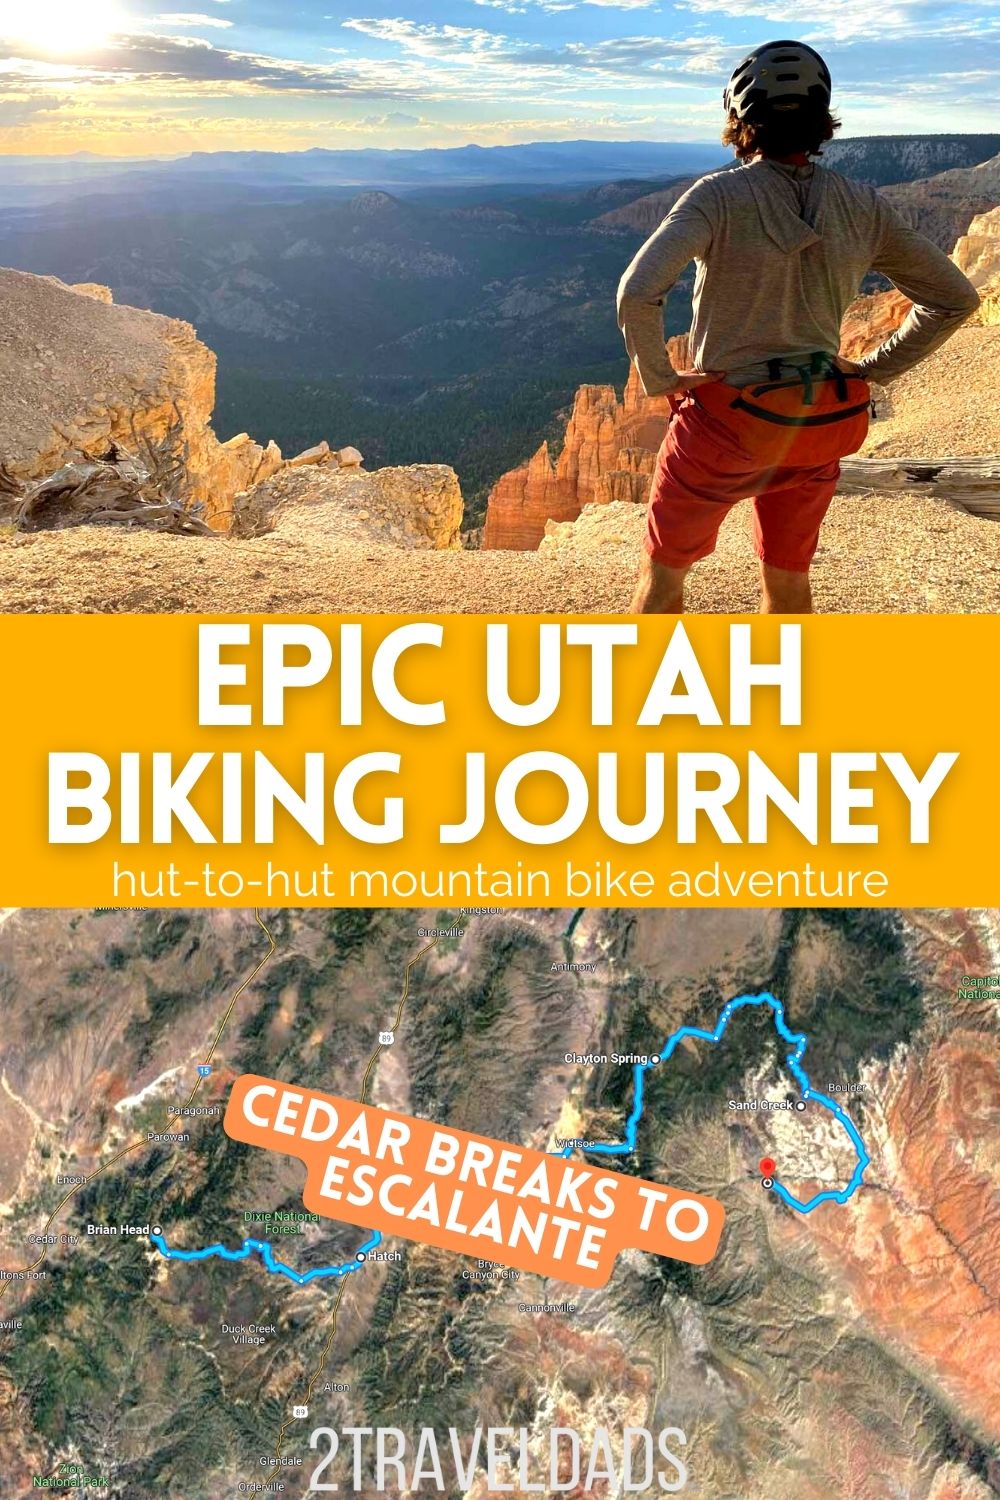 This epic Utah biking journey takes you through Color Country, from Cedar Breaks National Monument to Grand-Staircase Esacalante. Staying in eco-huts along the way, doing a 190 mile mountain bike adventure in Utah is a bucket list item for outdoors people.